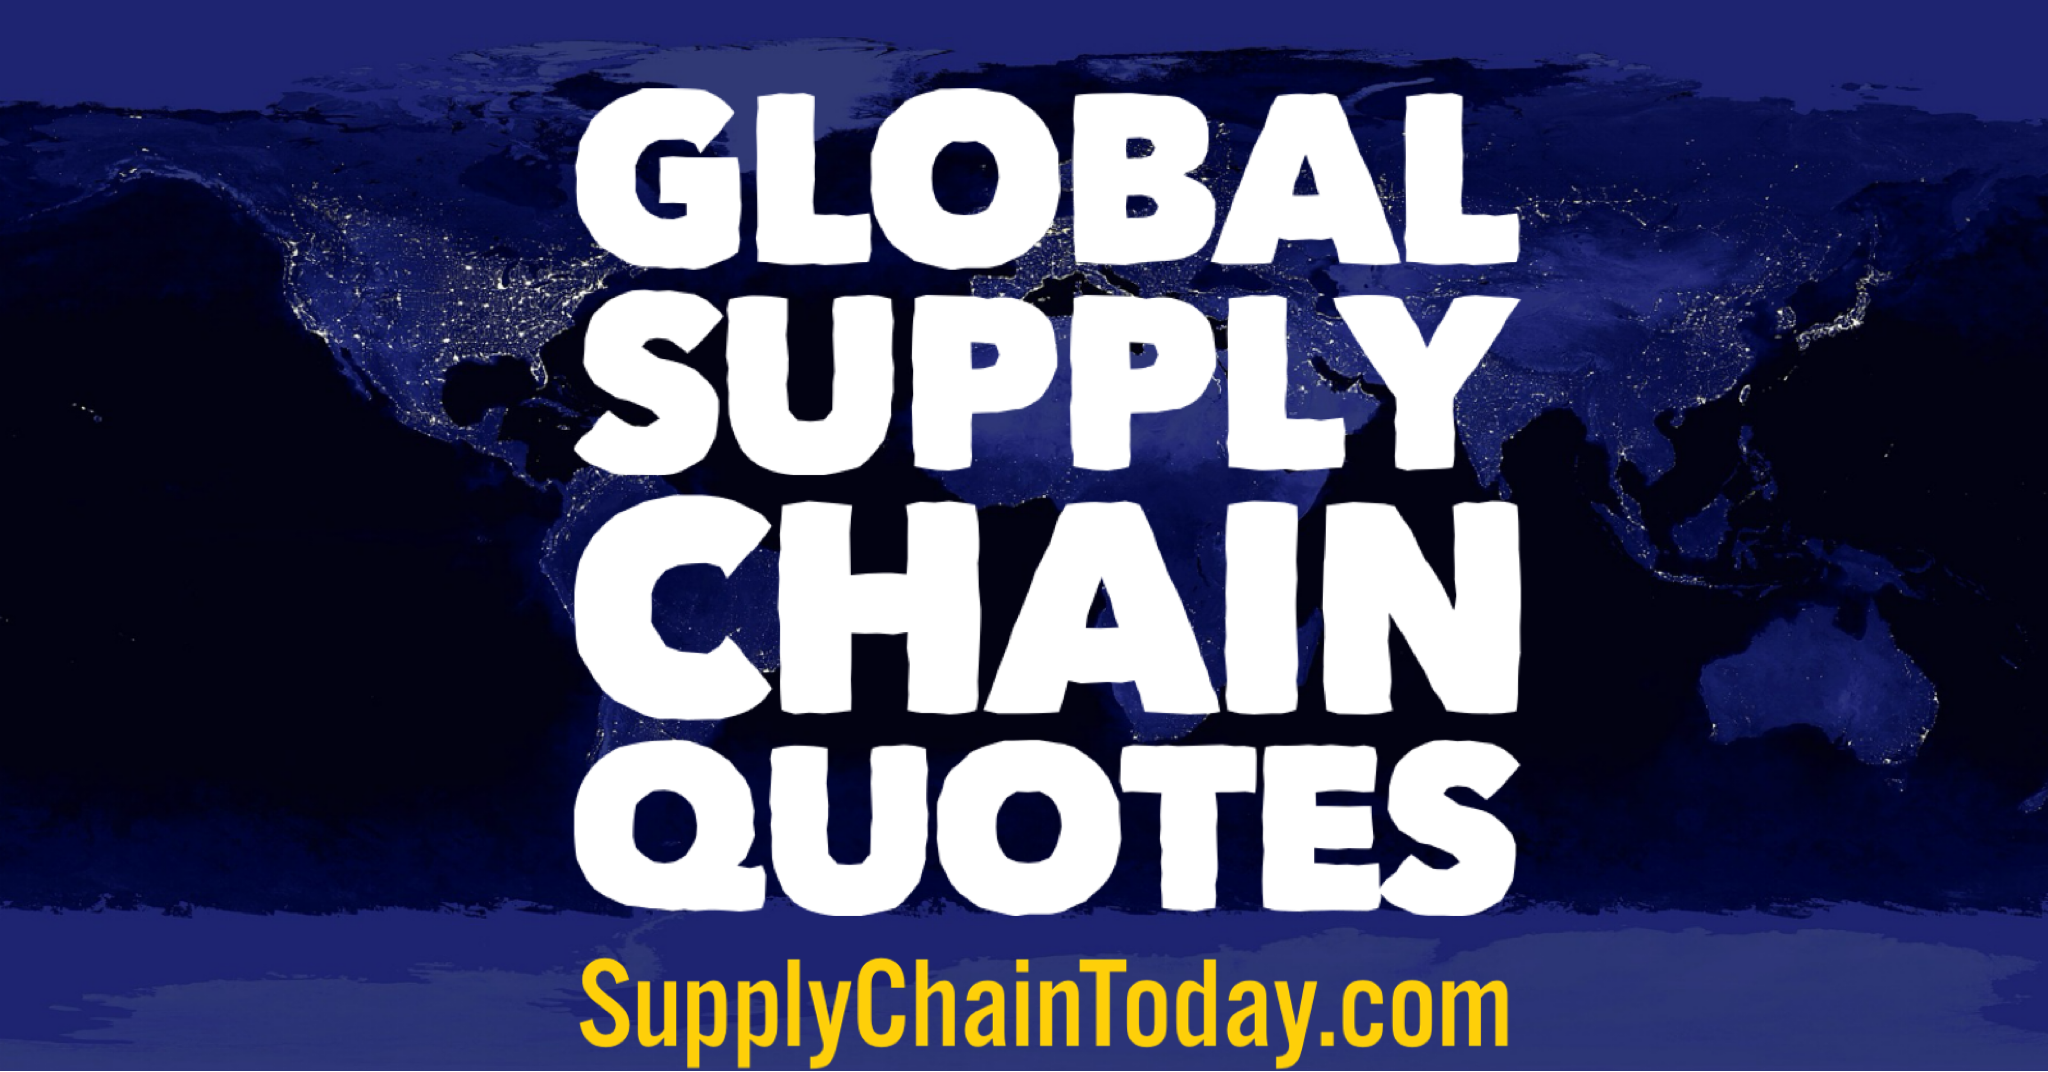 Global Supply Chain Quotes av Top Minds. -